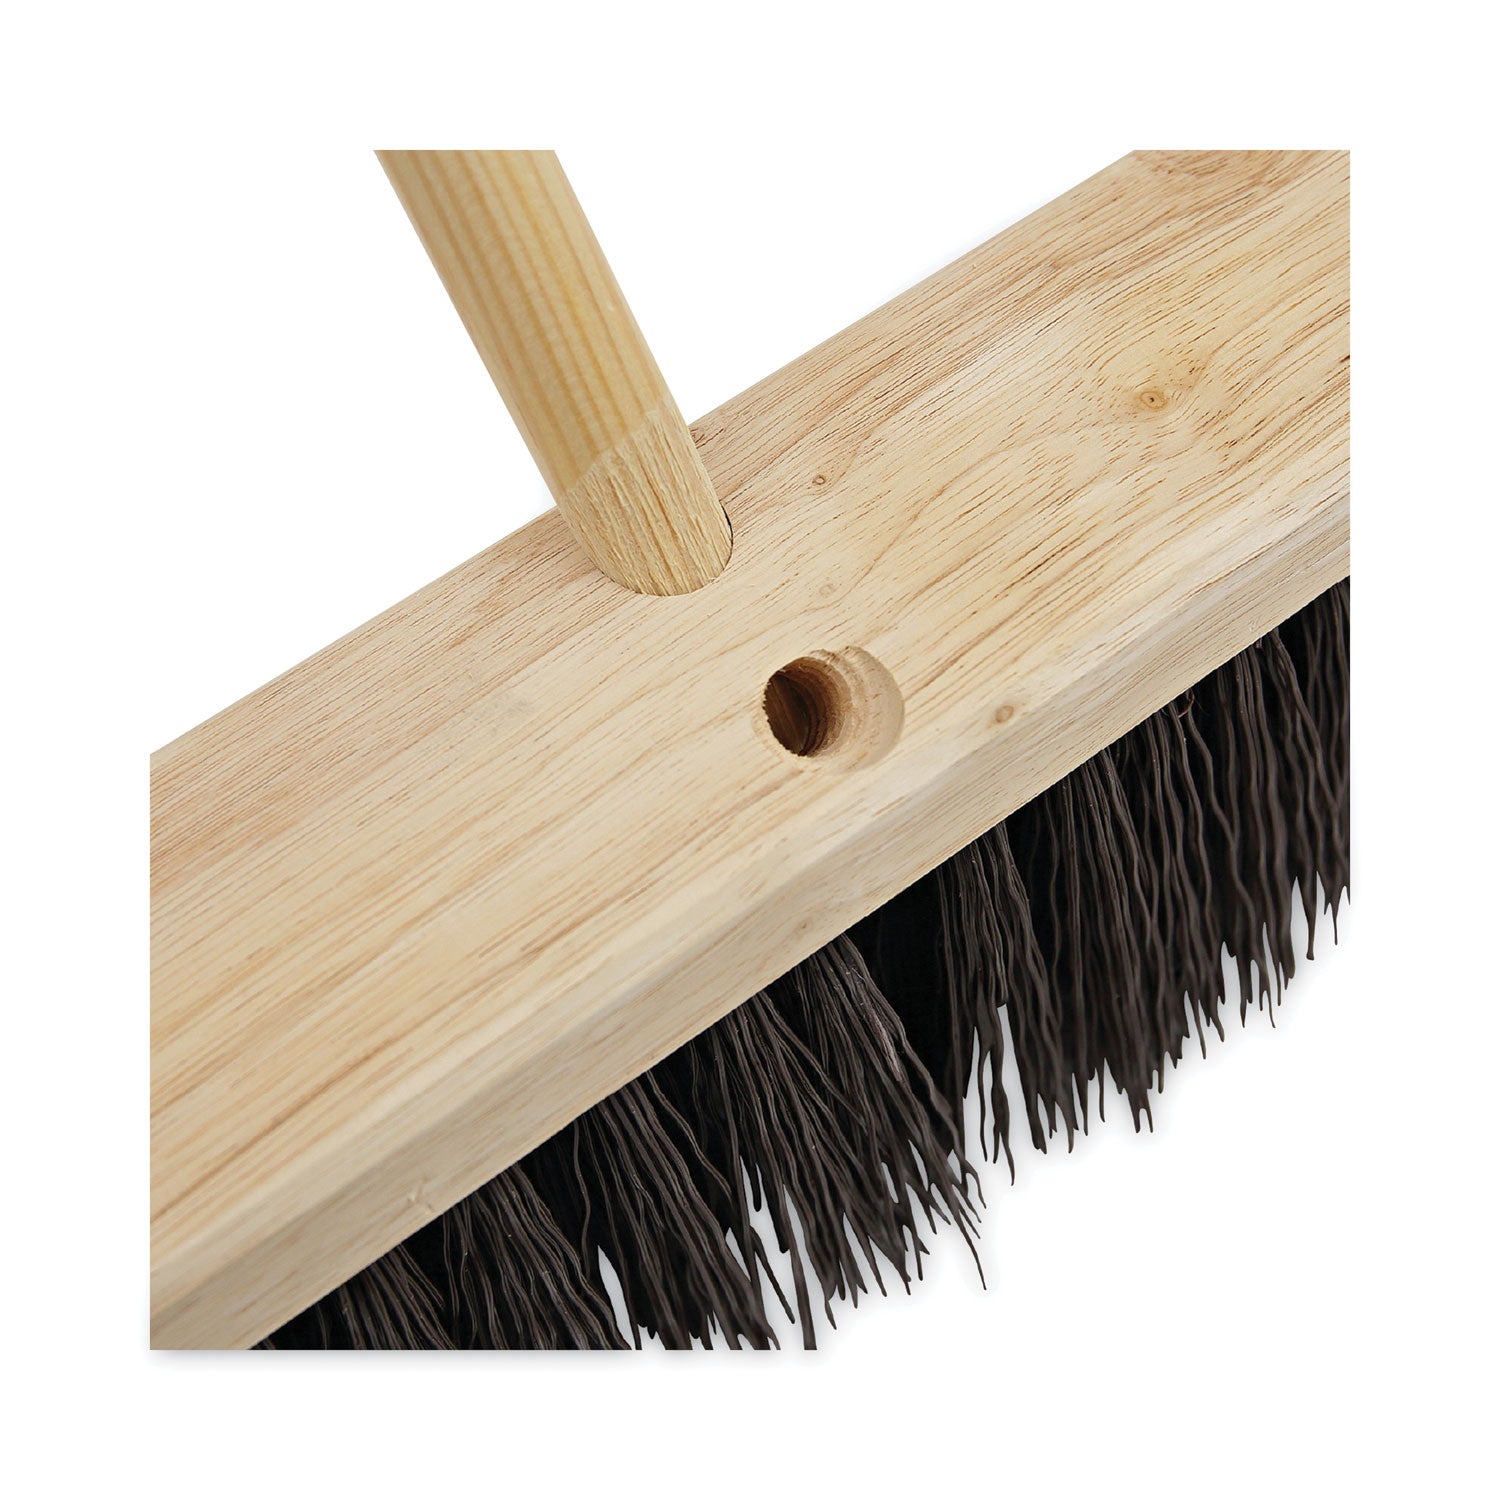 Tapered End Broom Handle, Lacquered Pine, 1.13" dia x 60", Natural - 